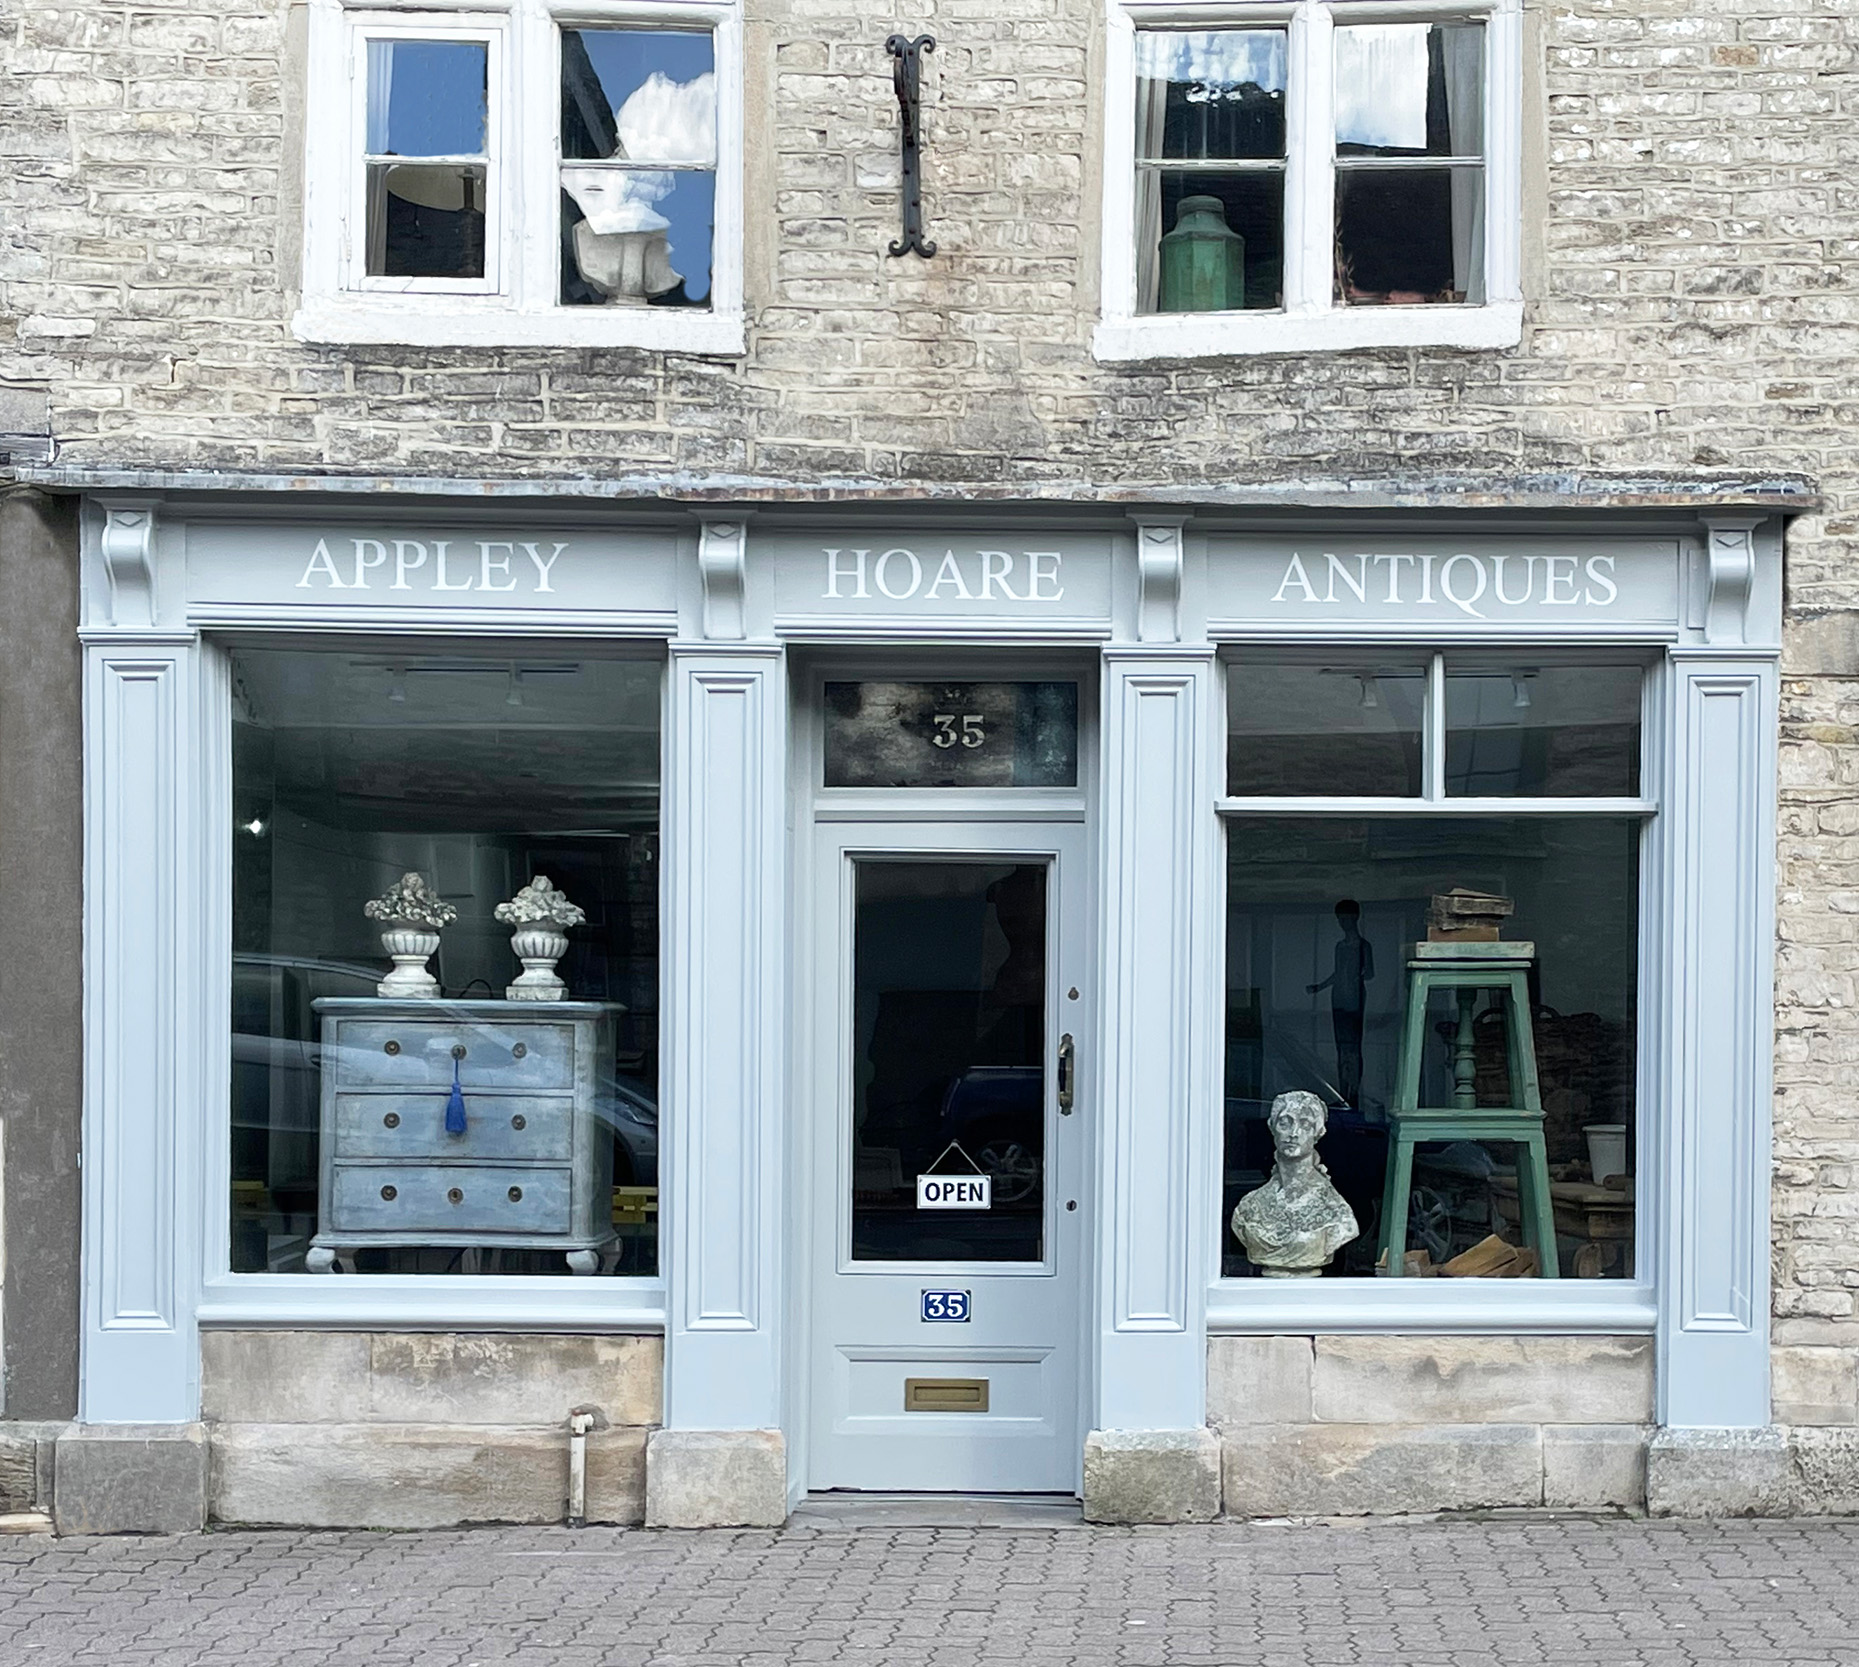 Appley Hoare Antiques